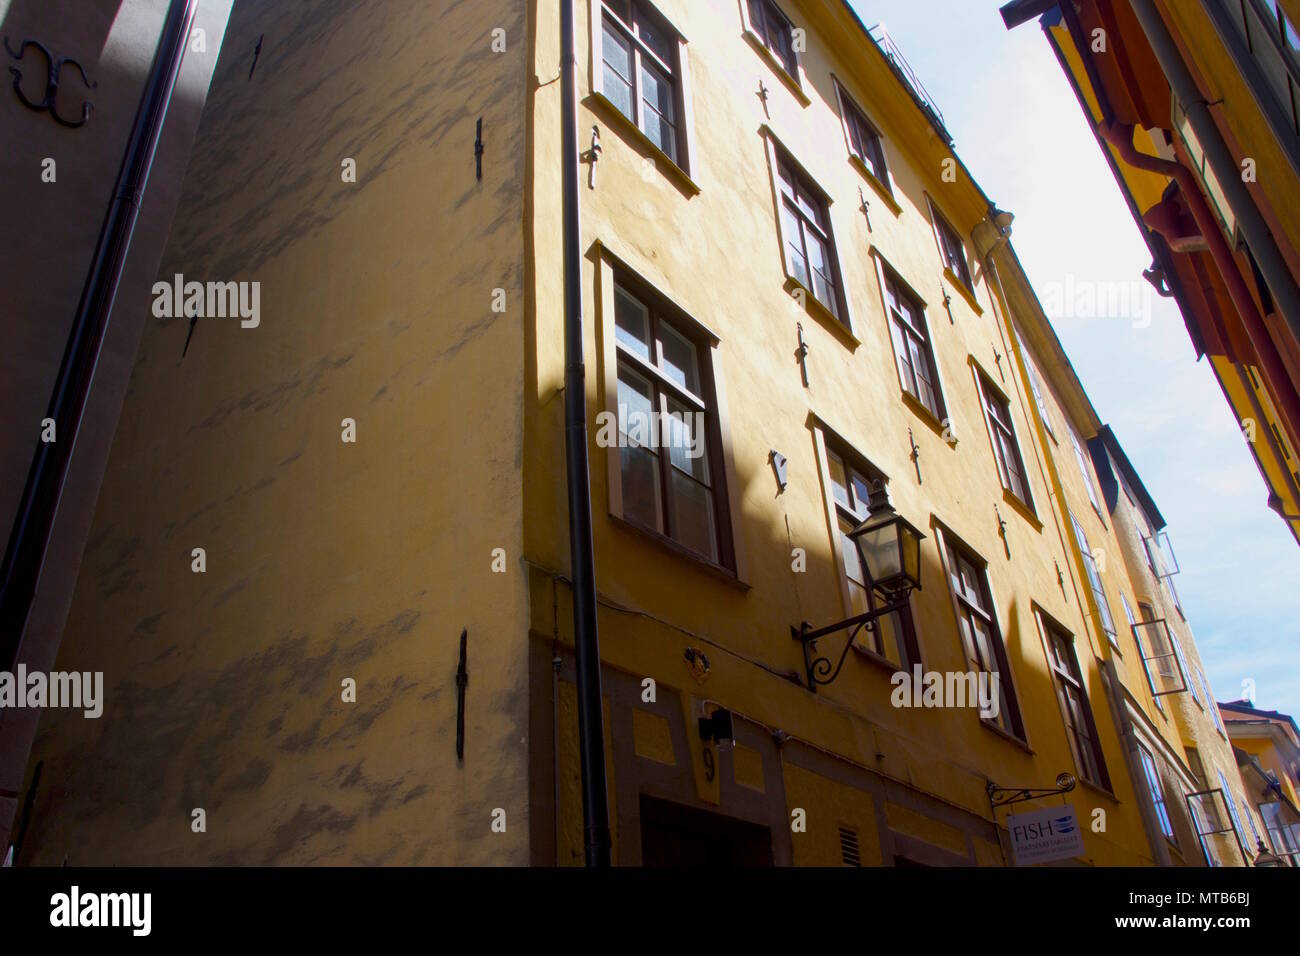 A yellow building in Gamla Stan, Stockholm which features building anchor plates Stock Photo